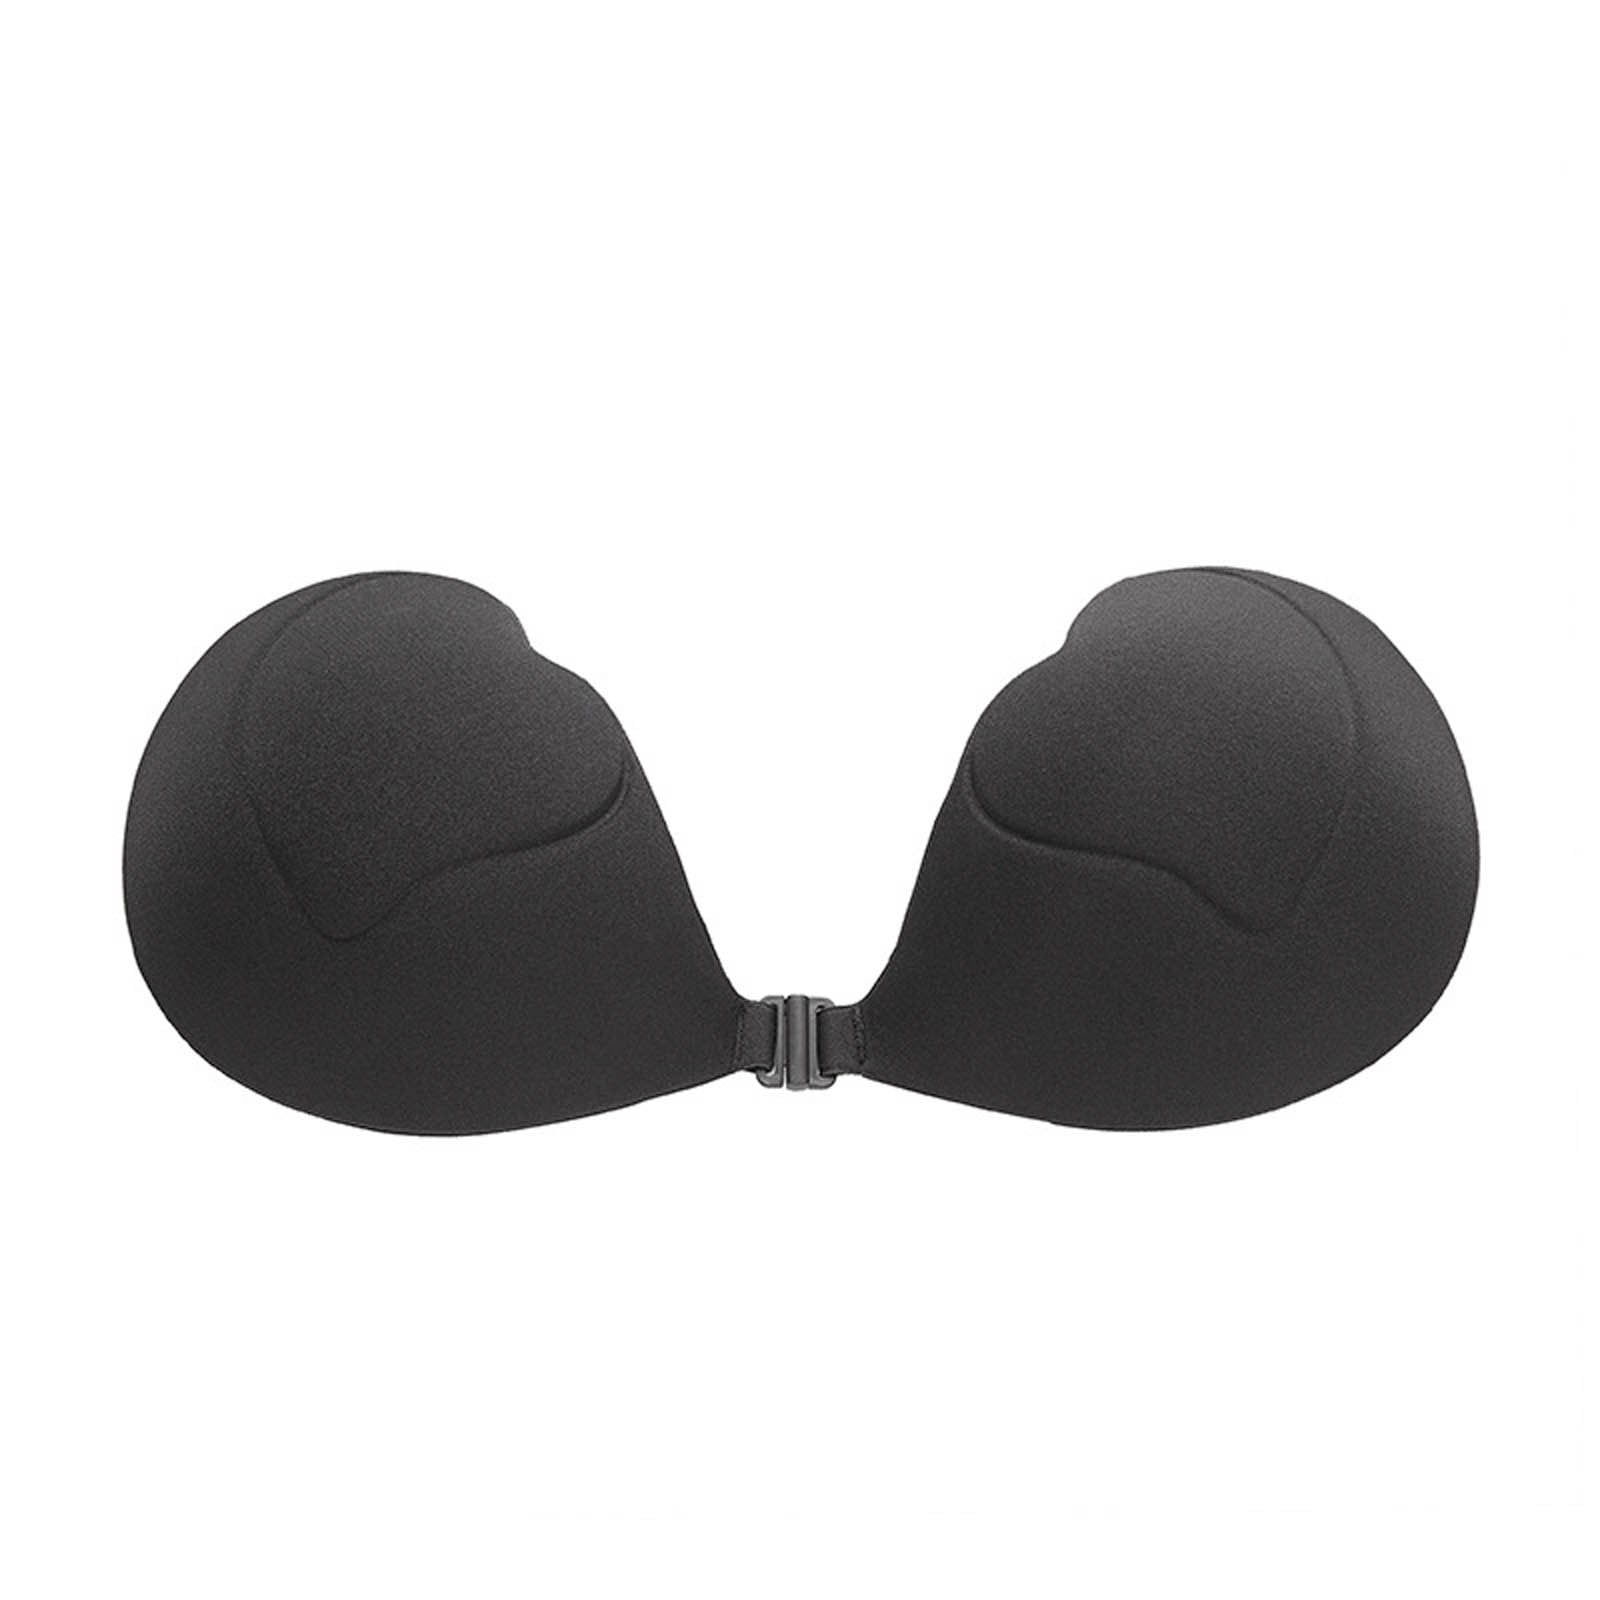 PLUMBURY LIGHTLY PADDED BREAST LIFT STRAPLESS PUSH UP SILICONE Women Stick- on Lightly Padded Bra - Buy PLUMBURY LIGHTLY PADDED BREAST LIFT STRAPLESS  PUSH UP SILICONE Women Stick-on Lightly Padded Bra Online at